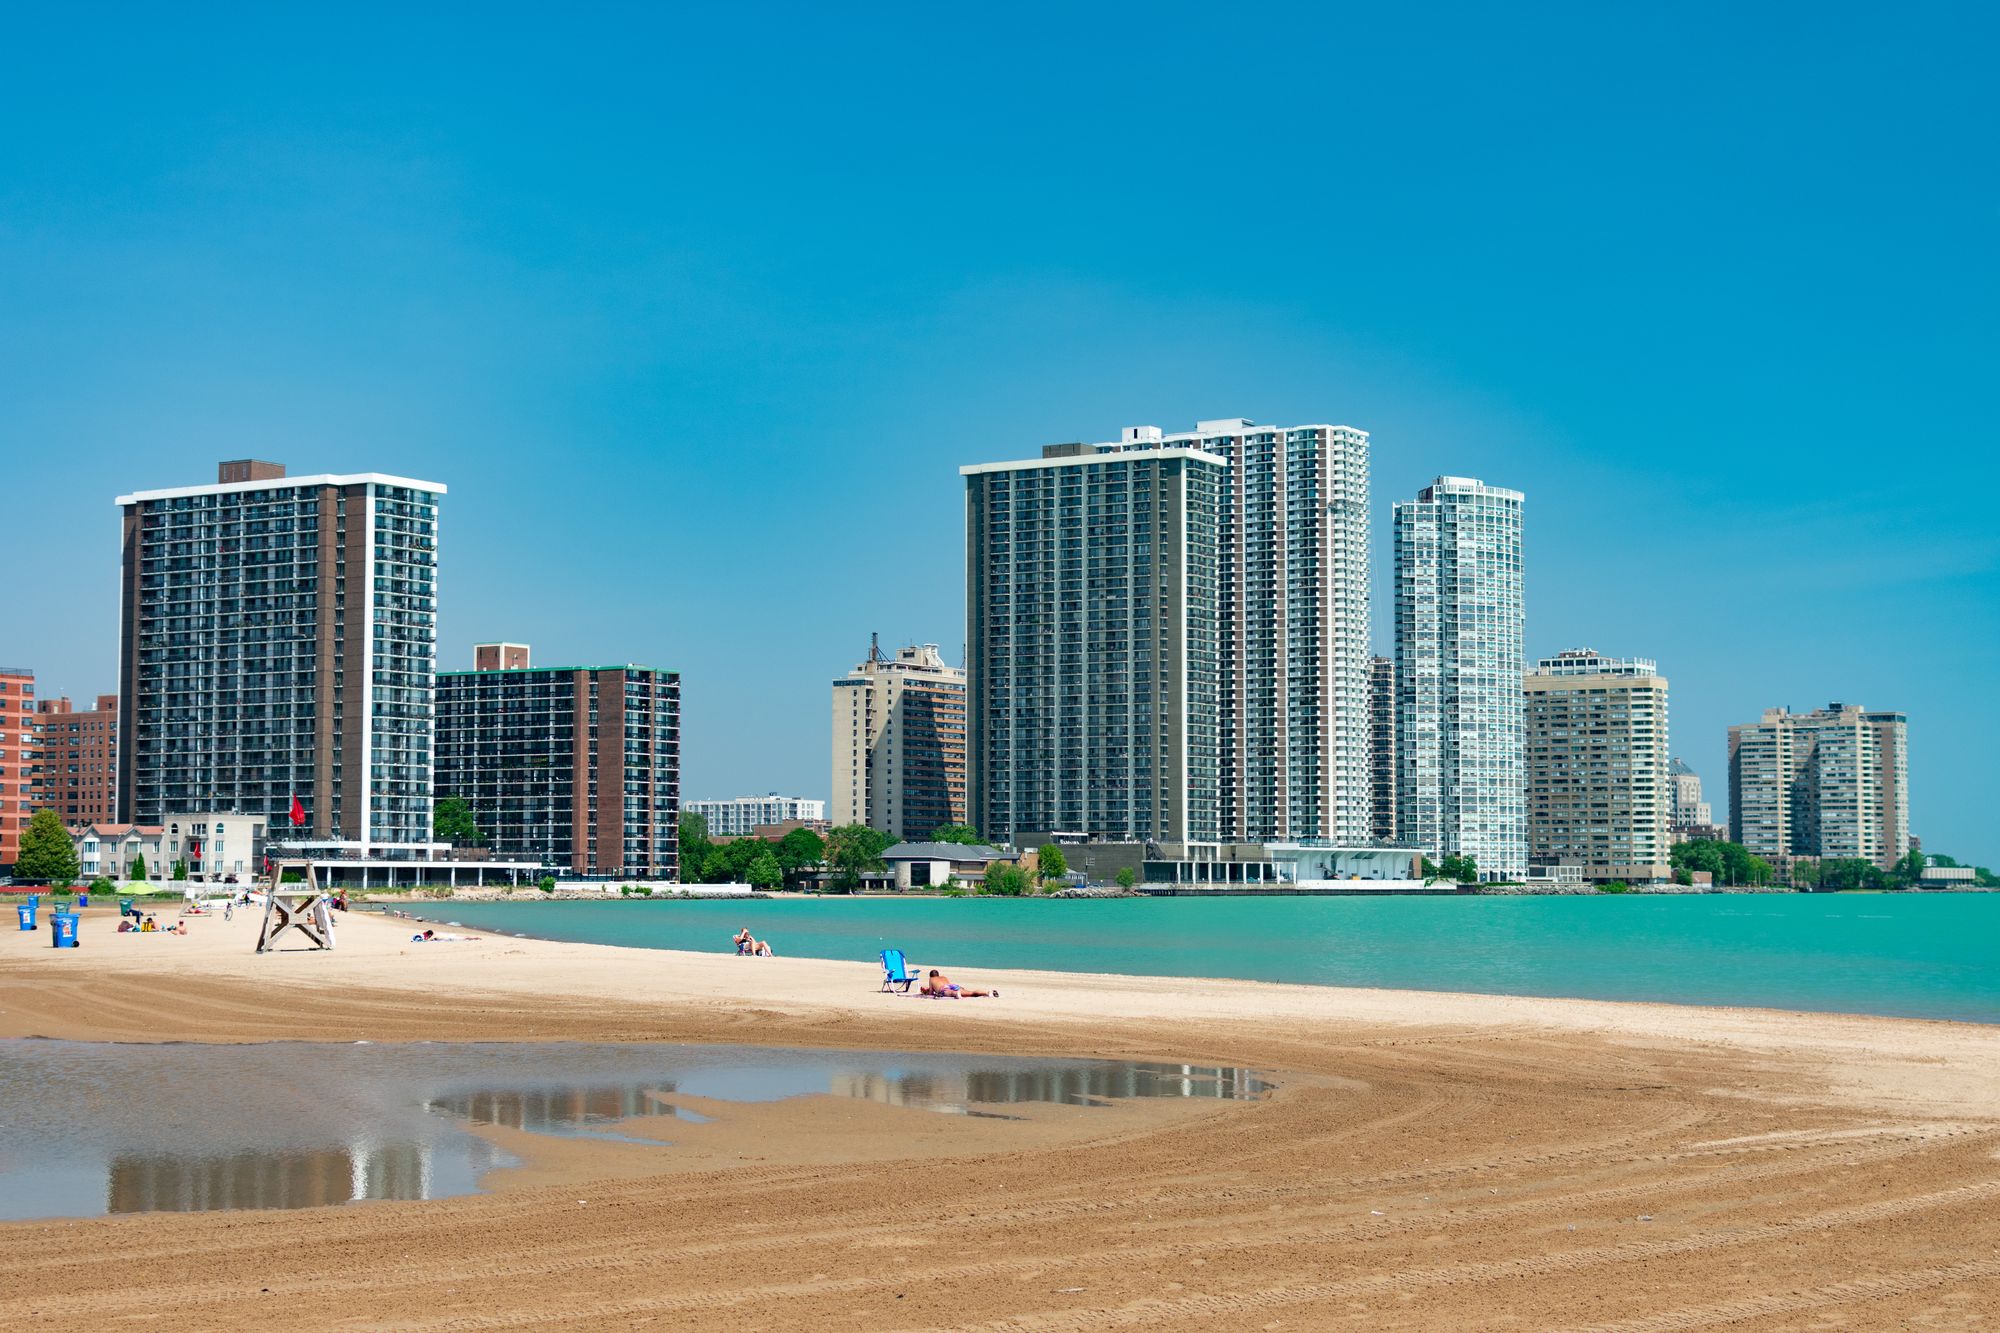 A photo of A beach in the Edgewater neighborhood of Chicago.